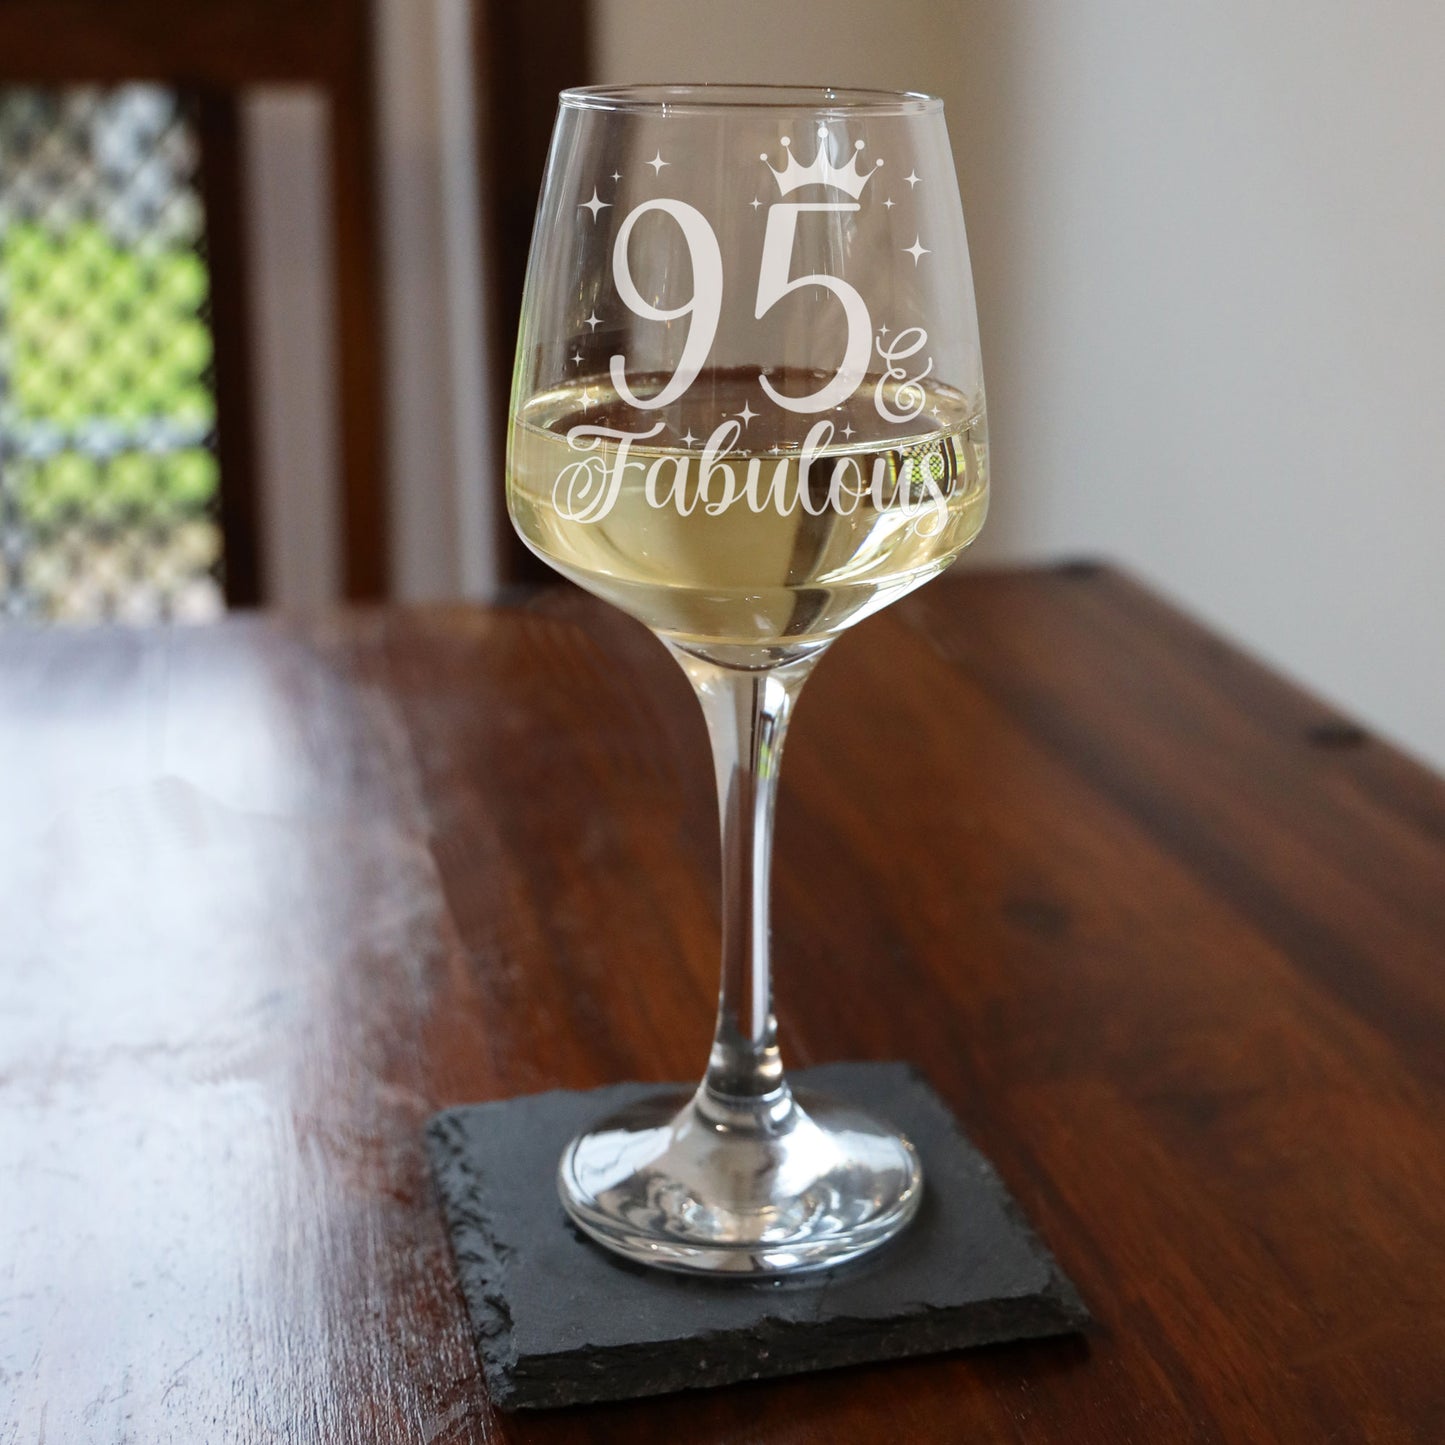 95 & Fabulous 95th Birthday Gift Engraved Wine Glass and/or Coaster Set  - Always Looking Good - Wine Glass Only  